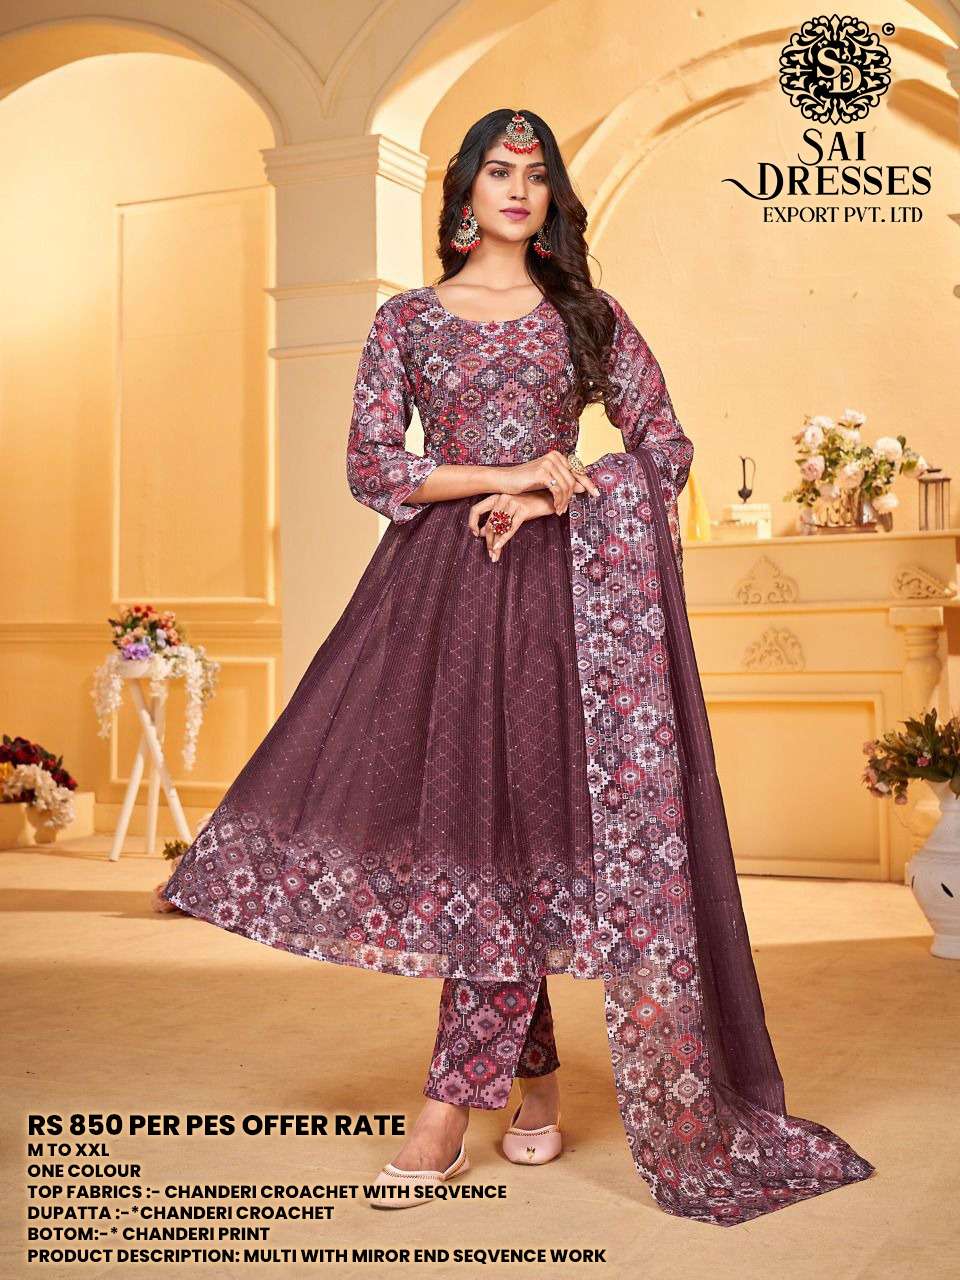 SAI DRESSES PRESENT D.NO 14010 READY TO DESIGNER WEAR ANARKALI STYLE 3 PIECE COMBO SUITS IN WHOLESALE RATE IN SURAT